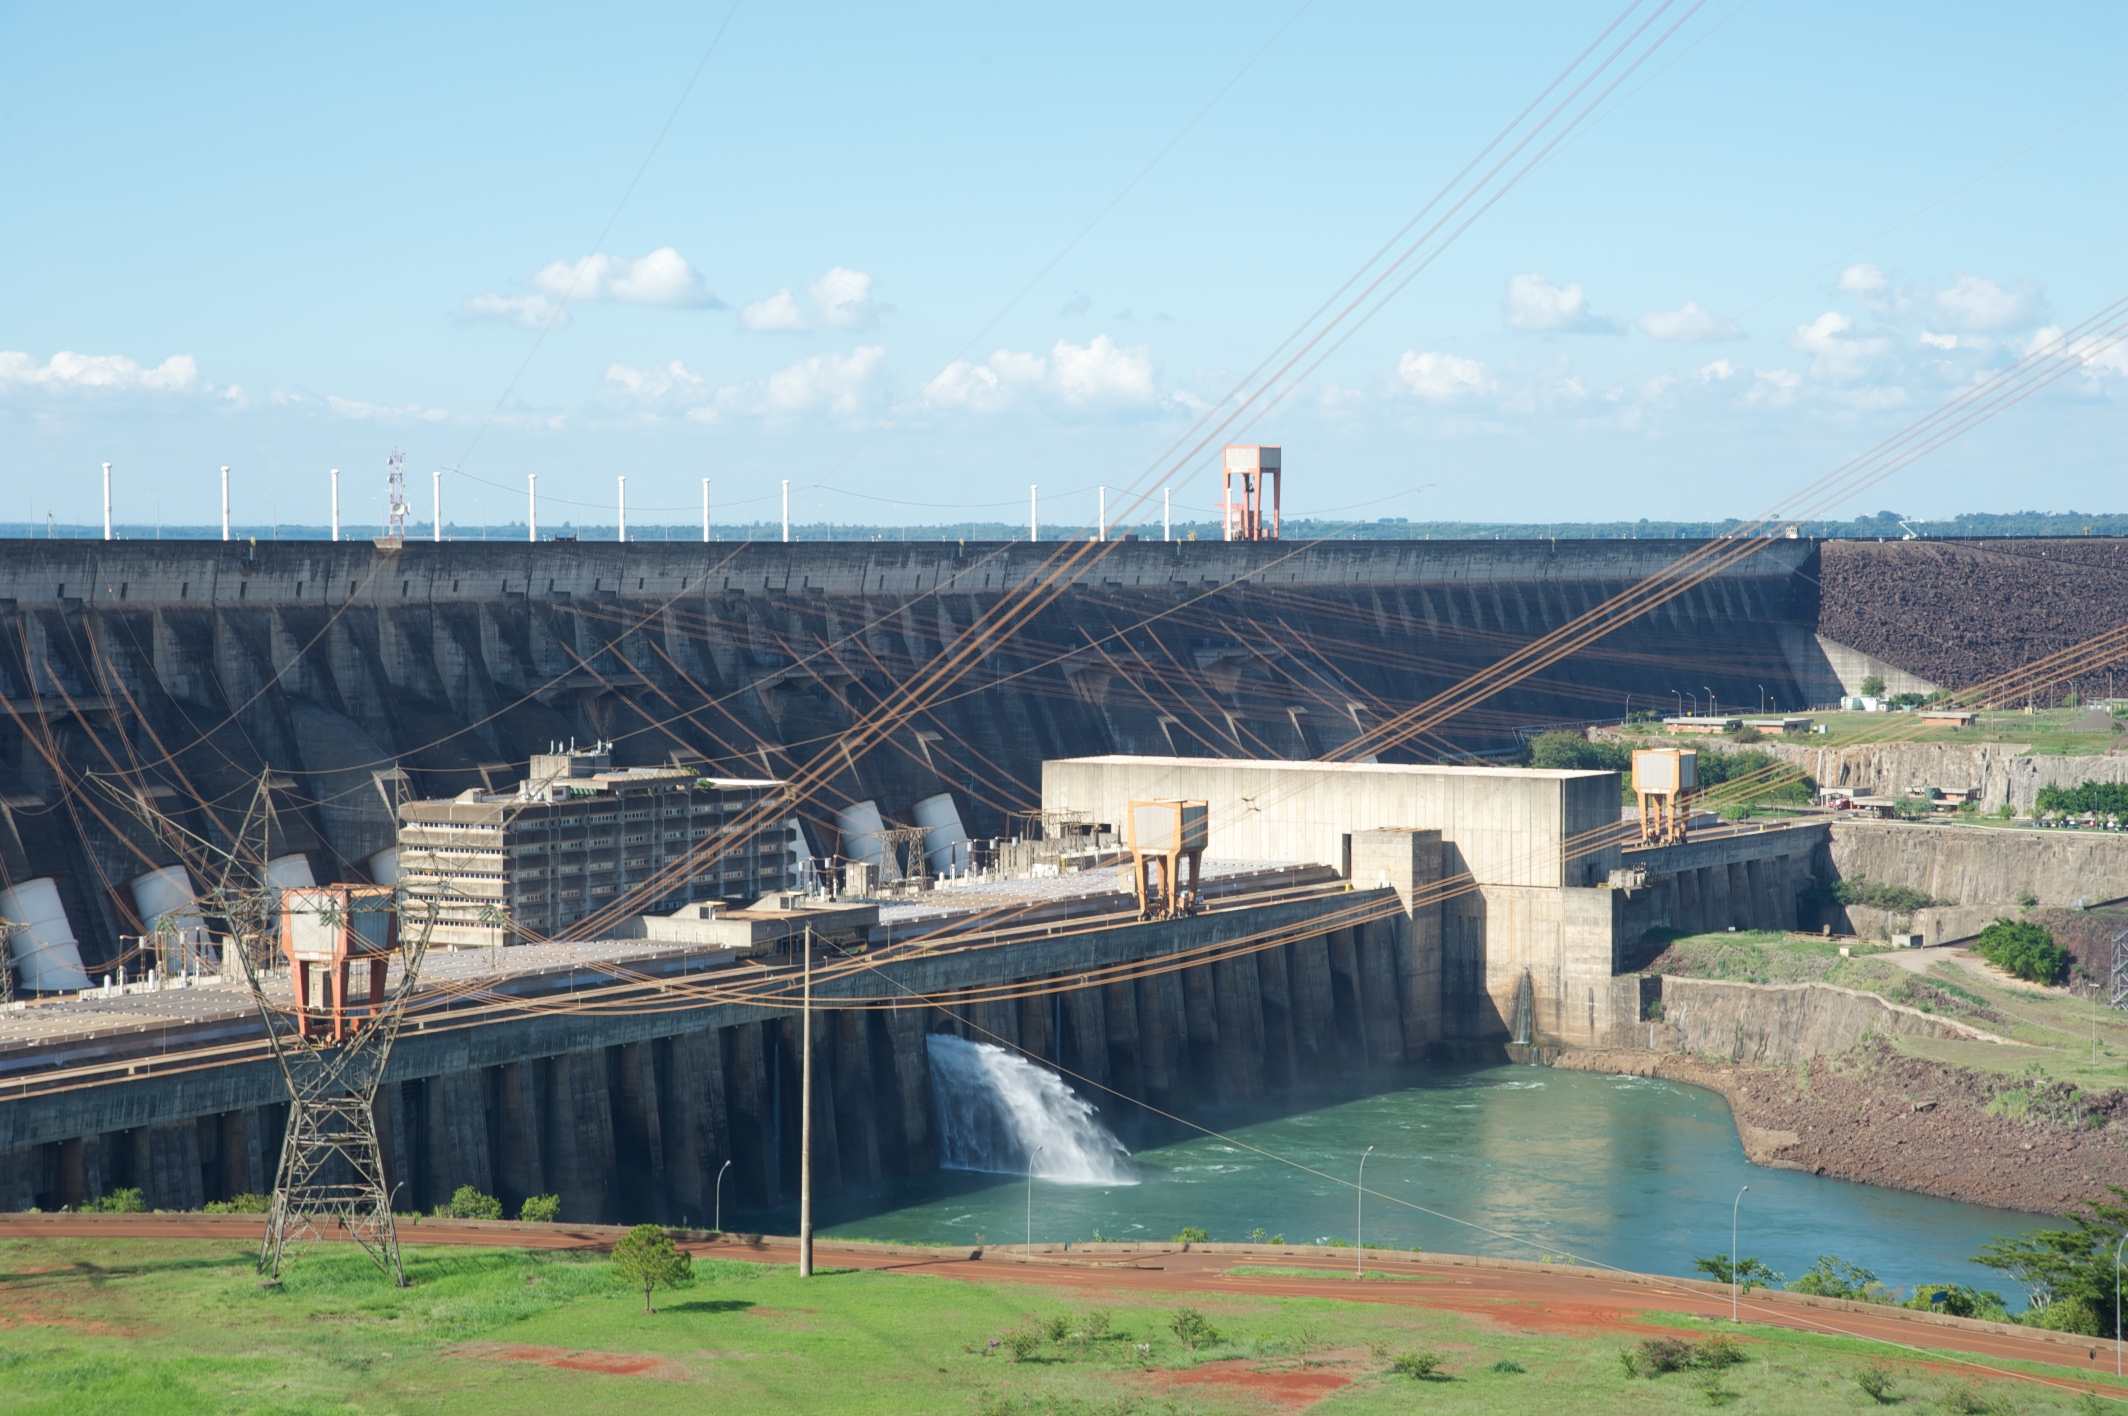  Control centre on border, Itaipu Power Station, Paraguay Brazil common zone 